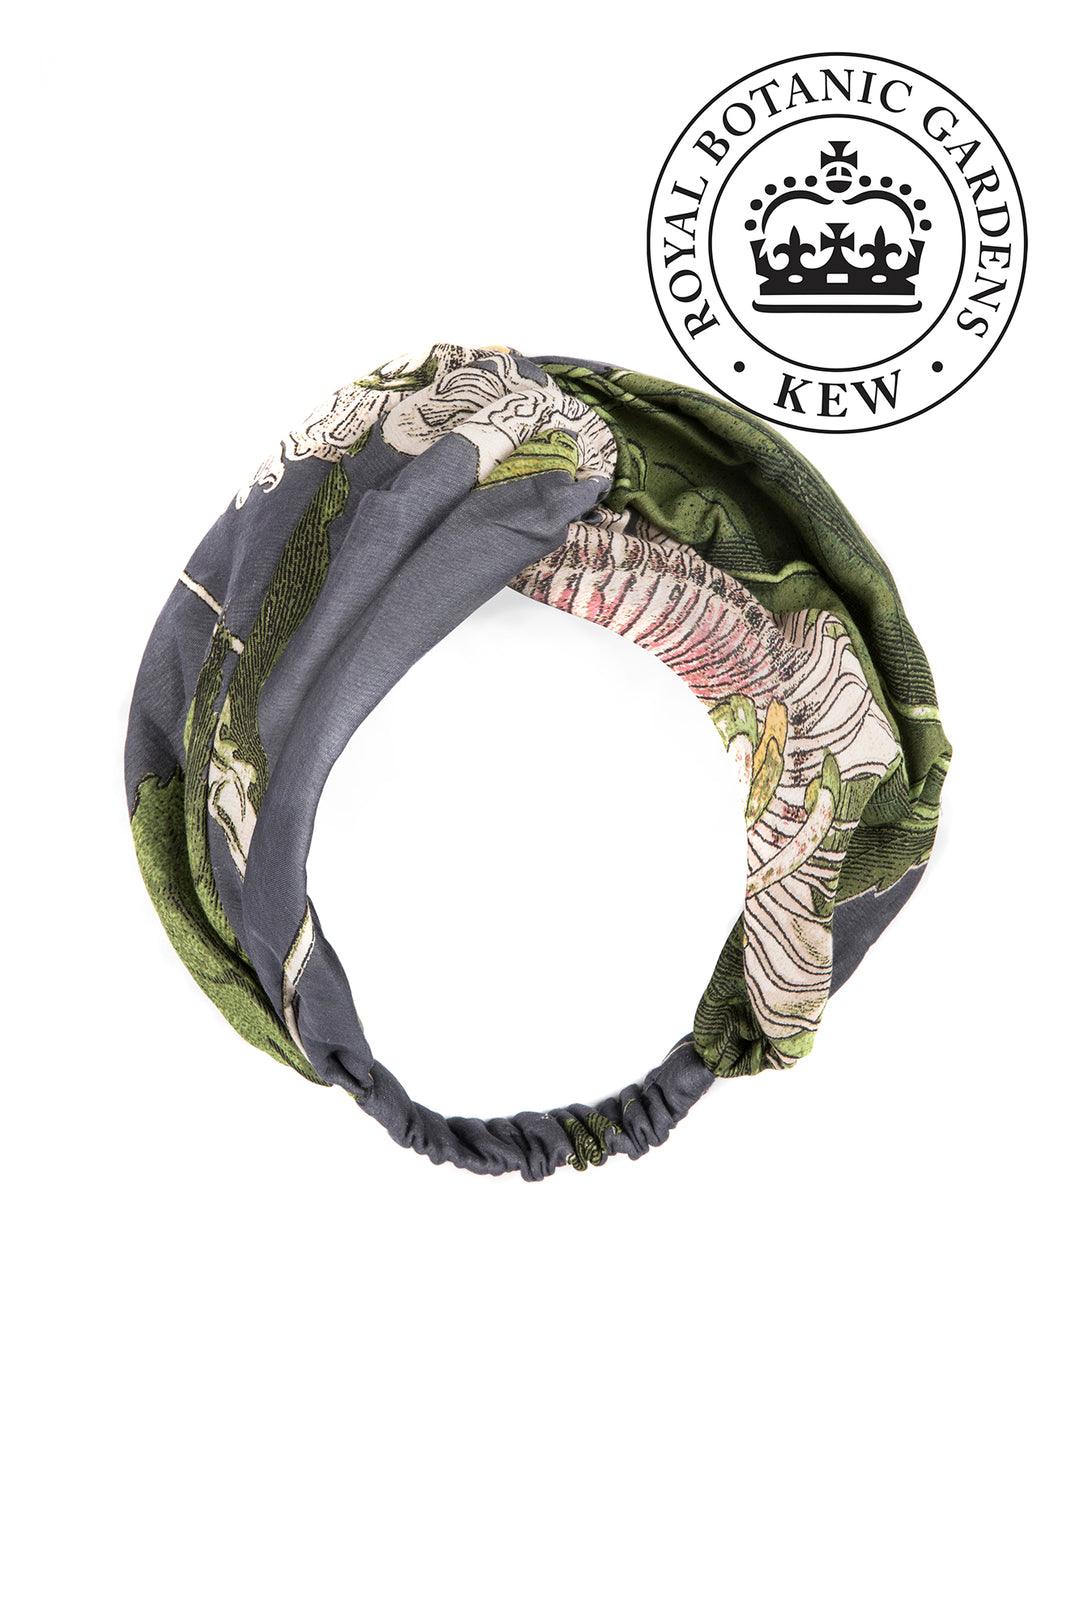 KEW Passion Flower Grey Headband- Our headbands are made from 100% recycled material using offcuts from our clothing production.